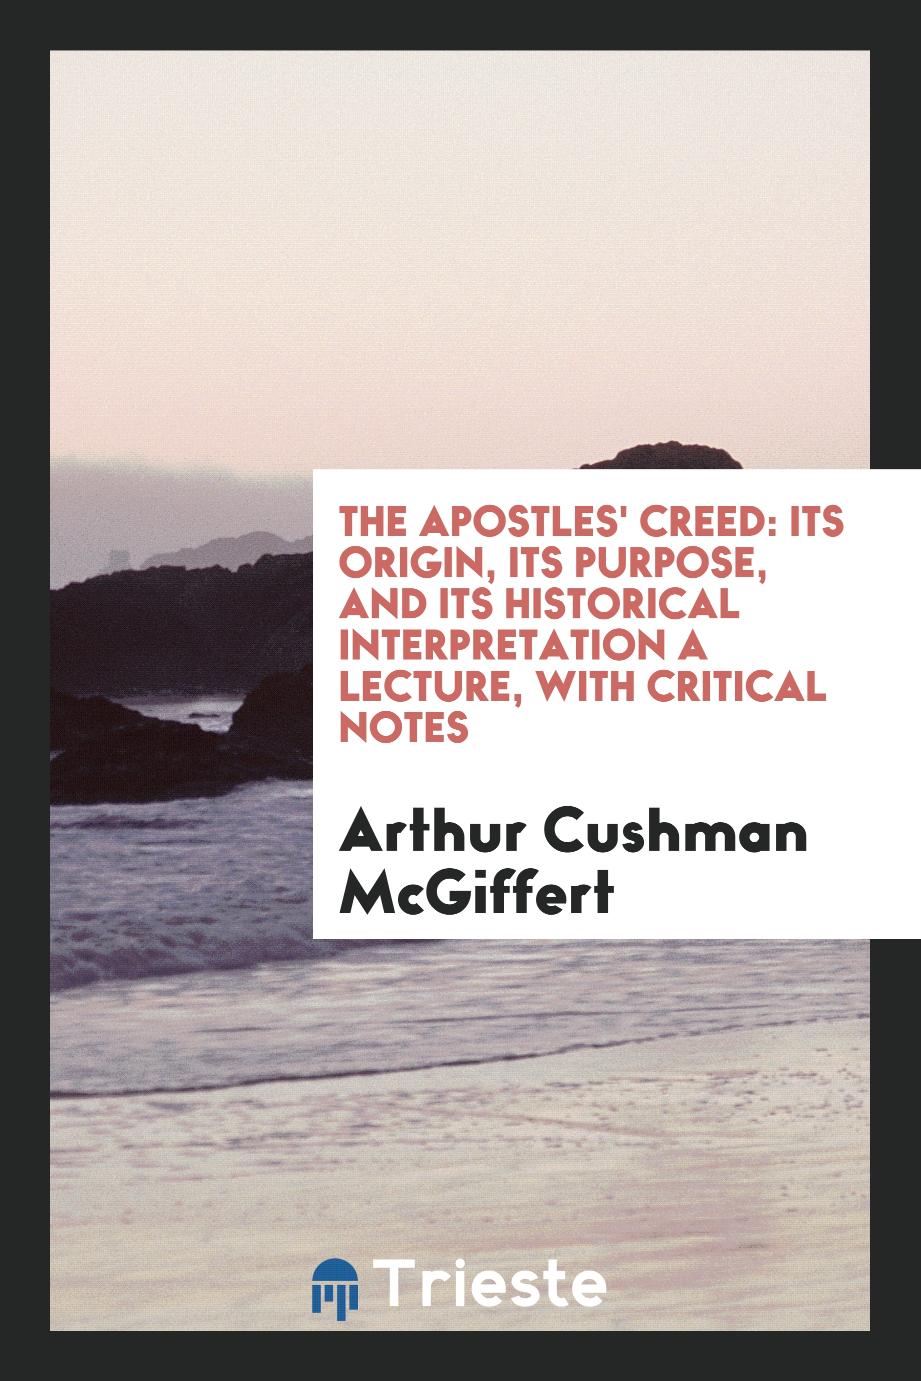 The Apostles' Creed: Its Origin, Its Purpose, and Its Historical Interpretation a Lecture, with Critical Notes